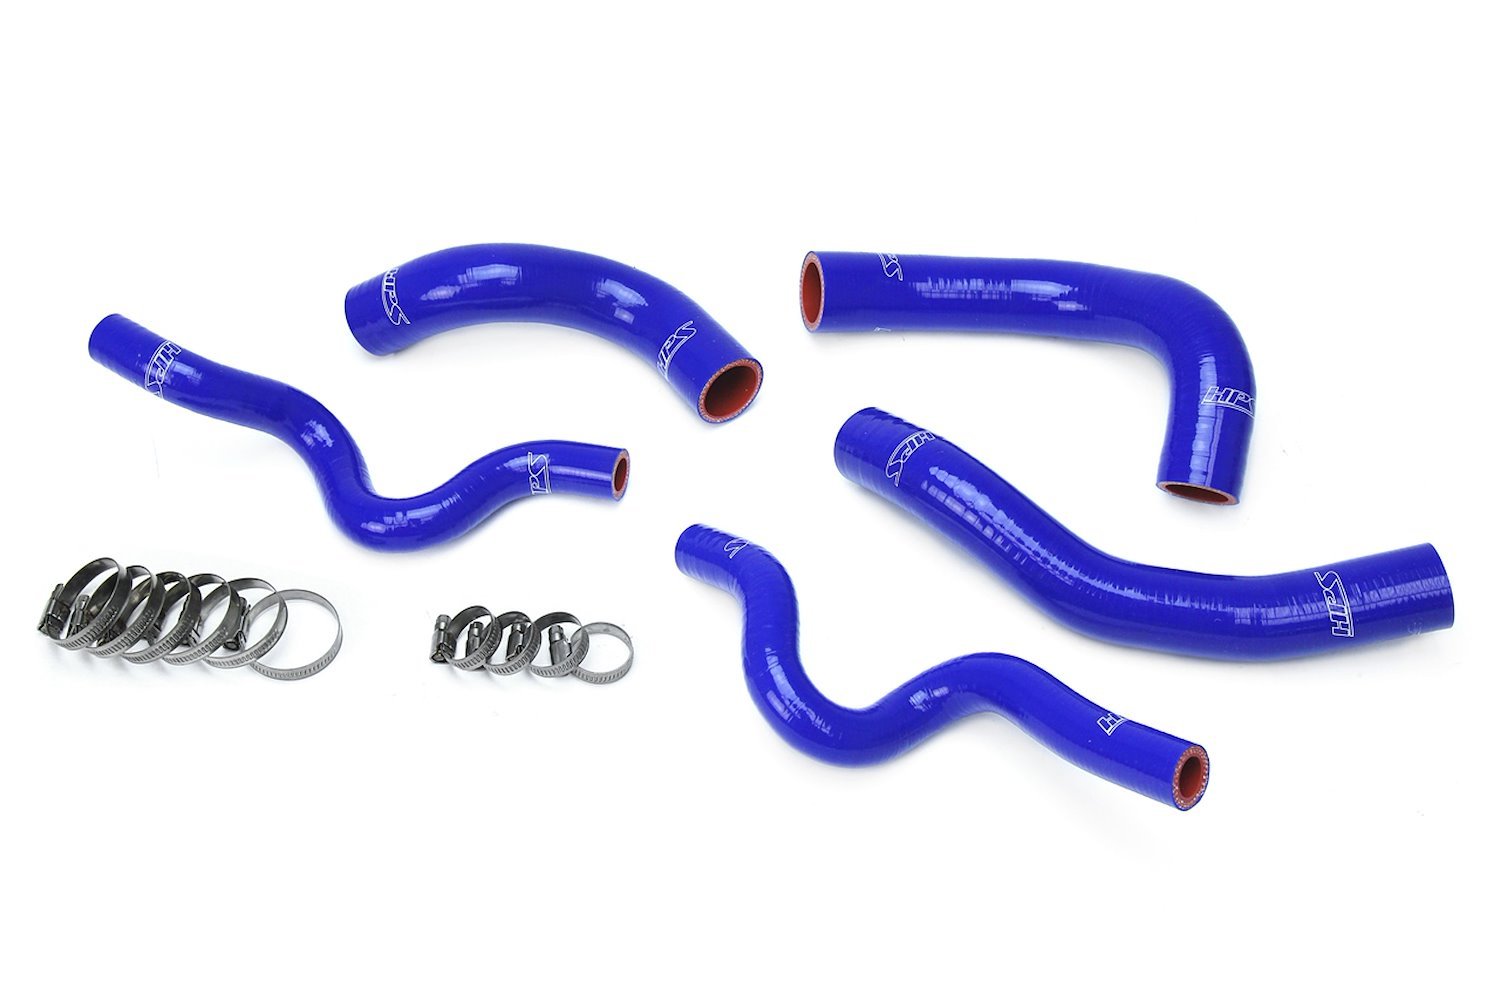 57-1630-BLUE Radiator Hose Kit, High-Temp 3-Ply Reinforced Silicone, Replace OEM Rubber Radiator Coolant Hoses